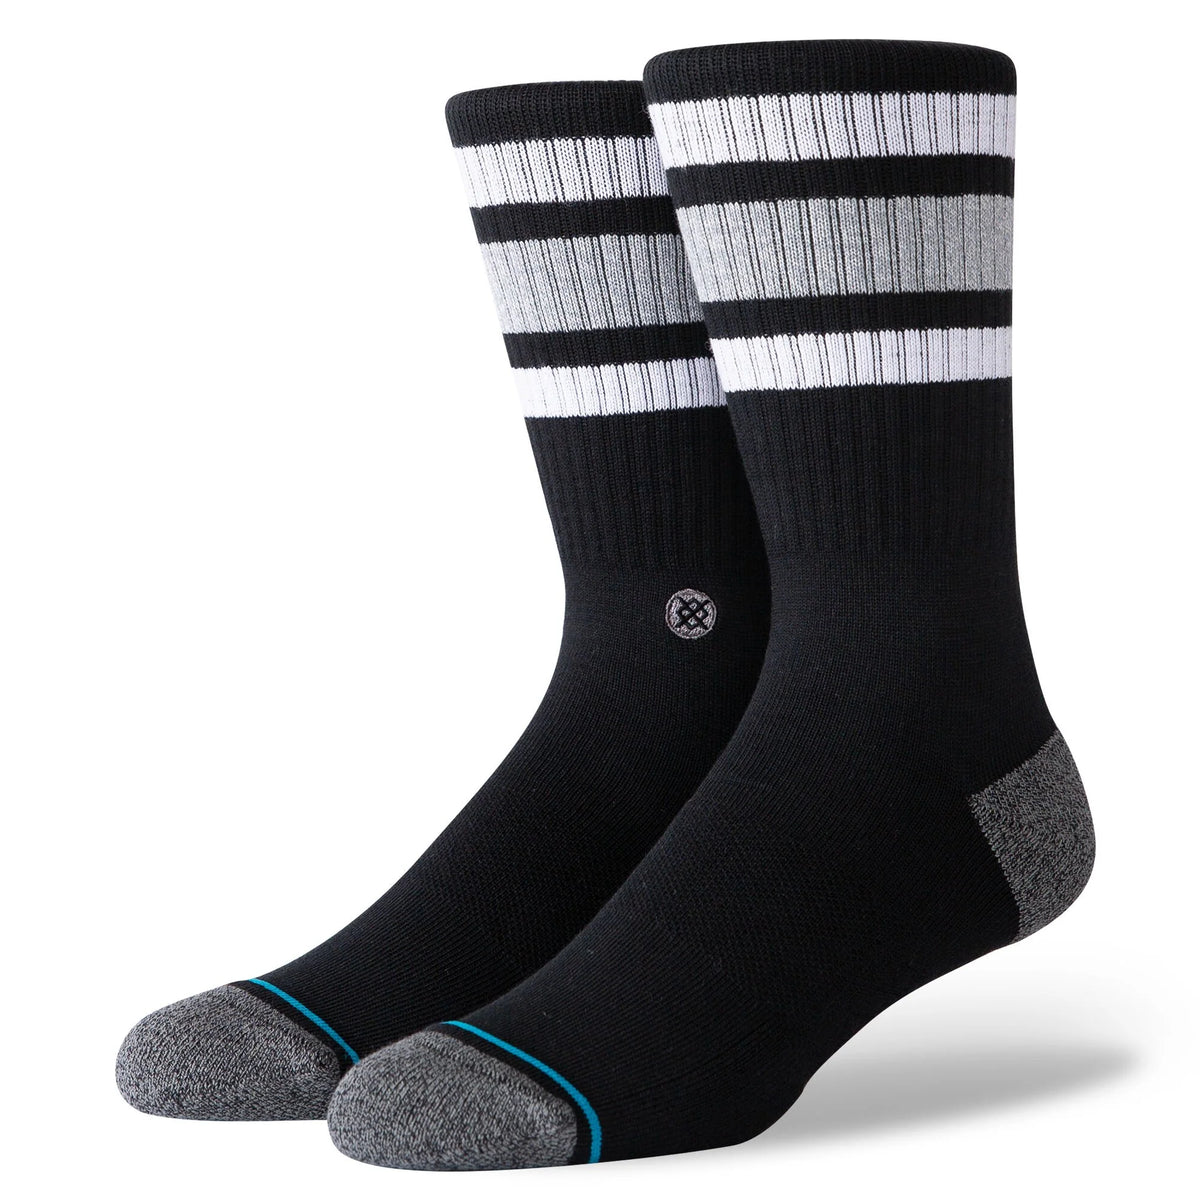 Stance THE BOYD Crew Socks - LARGE - MULTI - 3 PACK